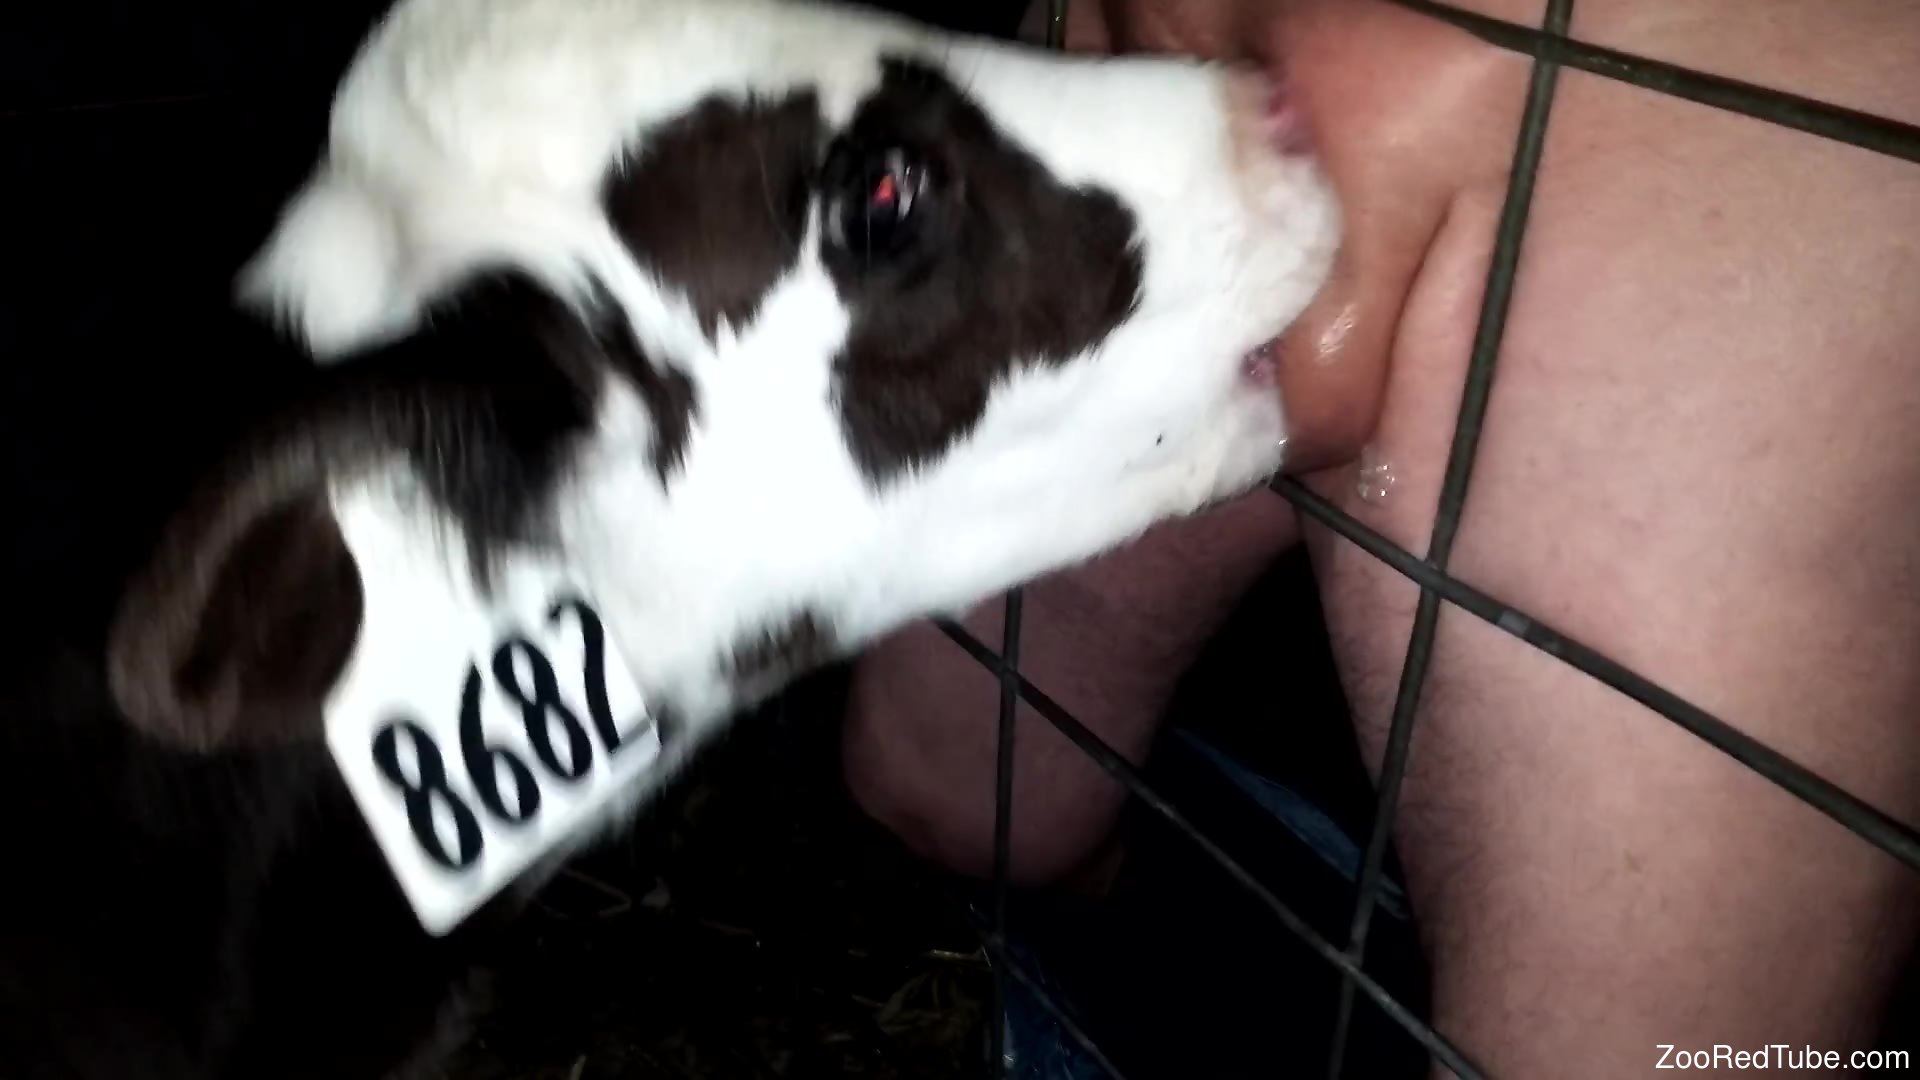 Cowandmanxxx - Man sticks his dick through the fence for this baby cow